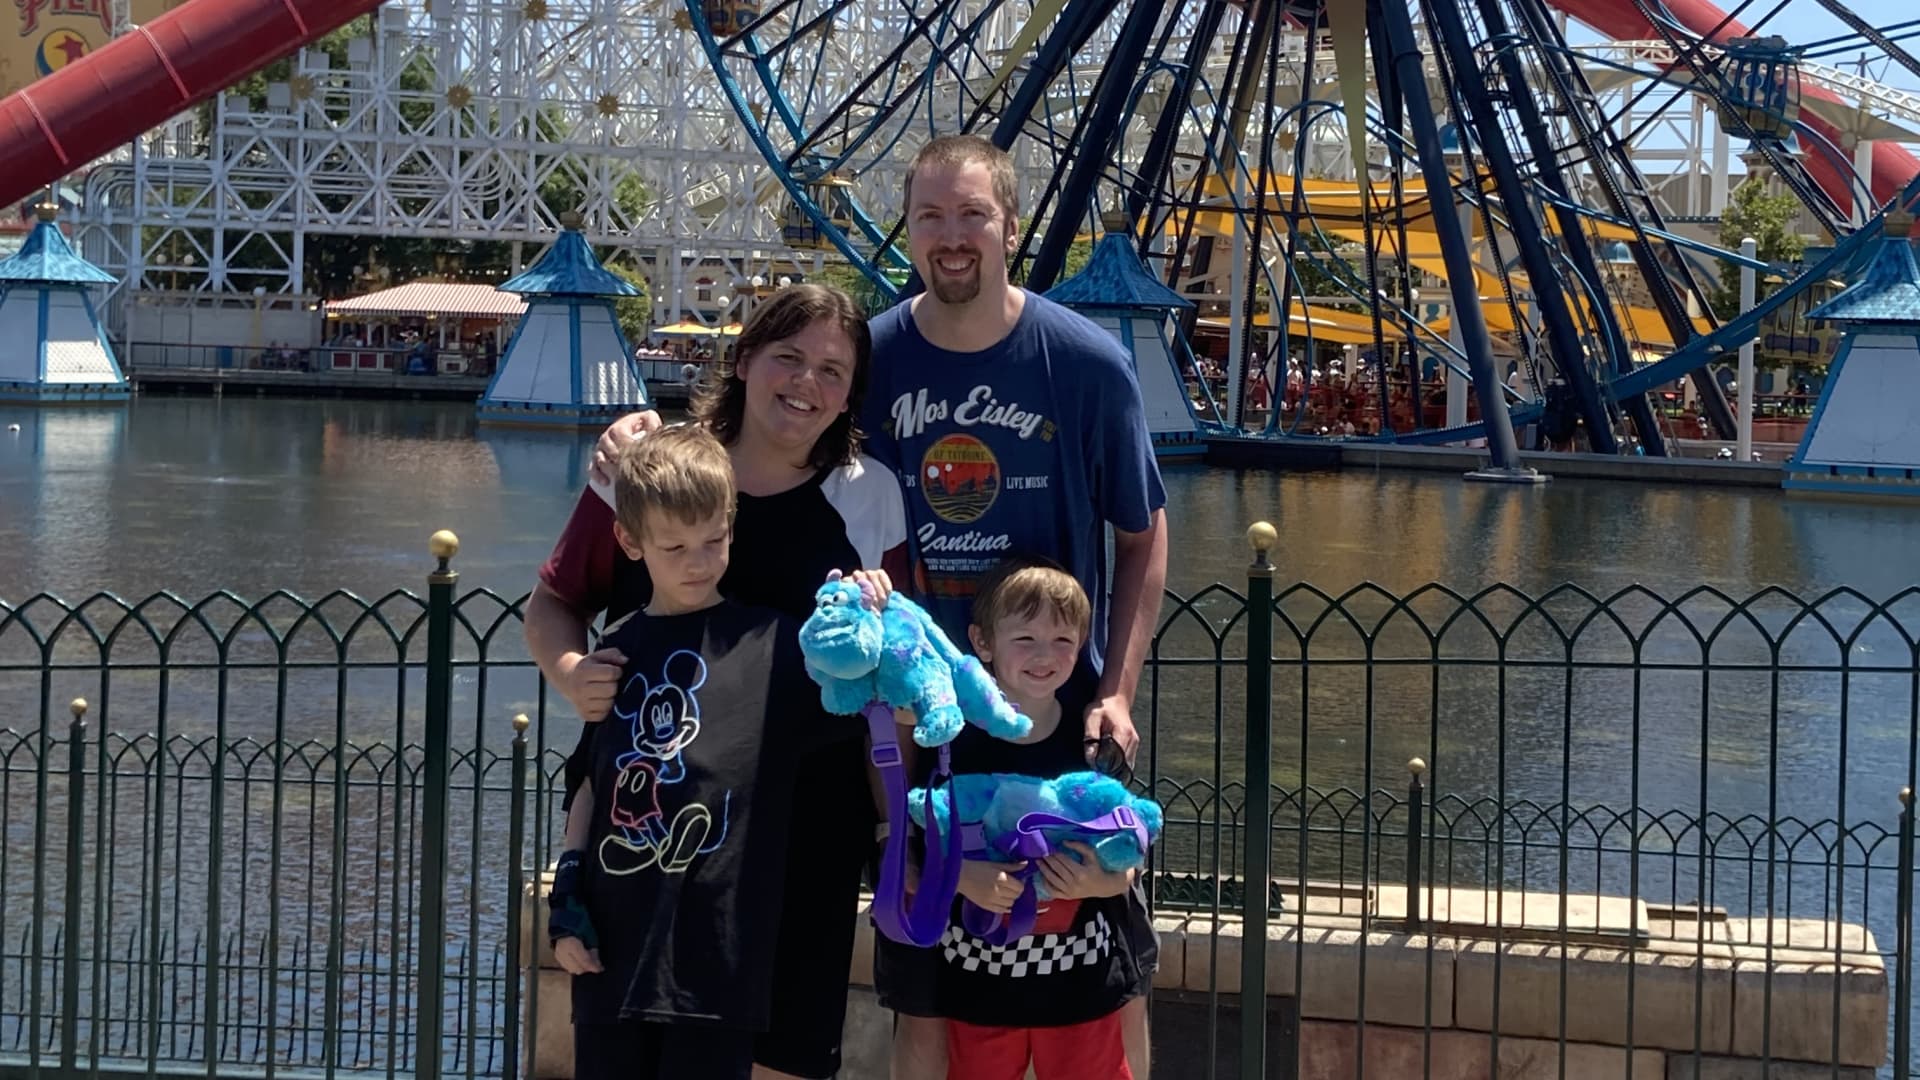 The Powells say they've used their side hustle earnings to pay off their student loans and take their two sons to Disneyland.